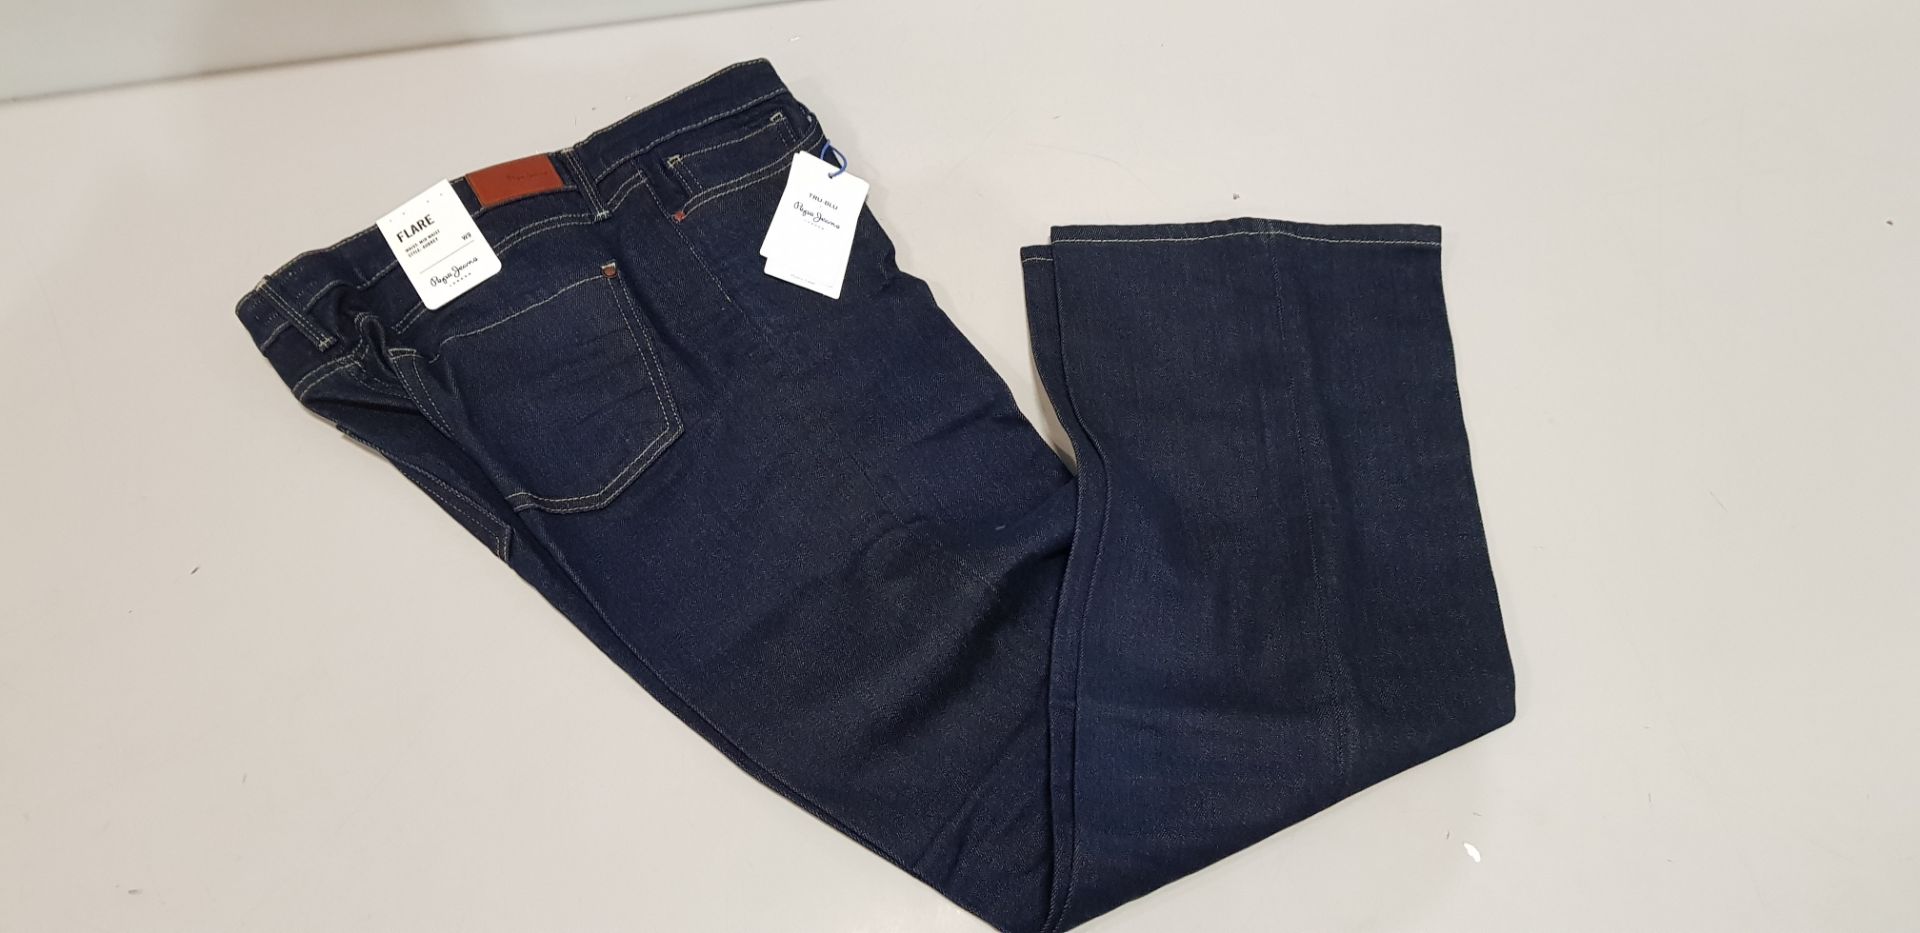 10 X BRAND NEW PEPE JEANS AUBREY DENIM JEANS - ALL IN VARIOUS SIZES TO INCLUDE 24-32 / 27-32/ 28-